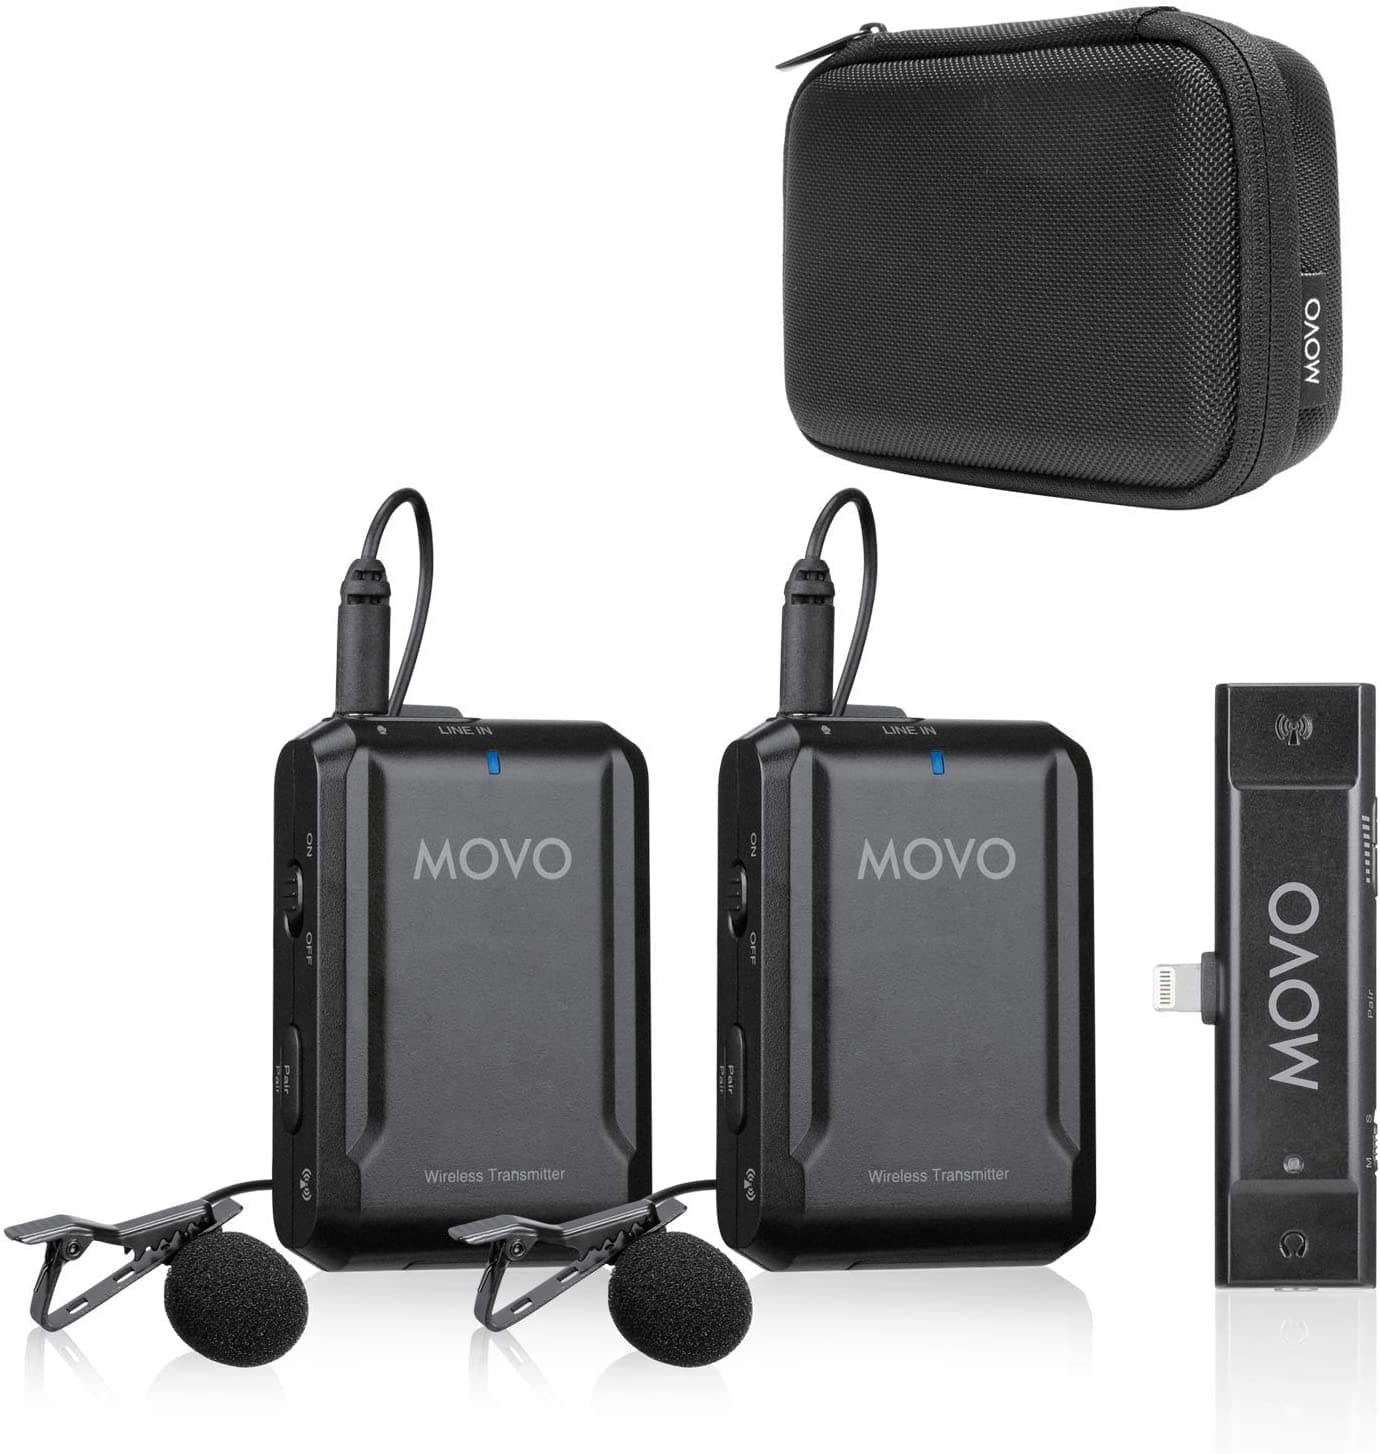 Bluetooth Mics for iPhones, Wireless iPhone Bluetooth Microphones